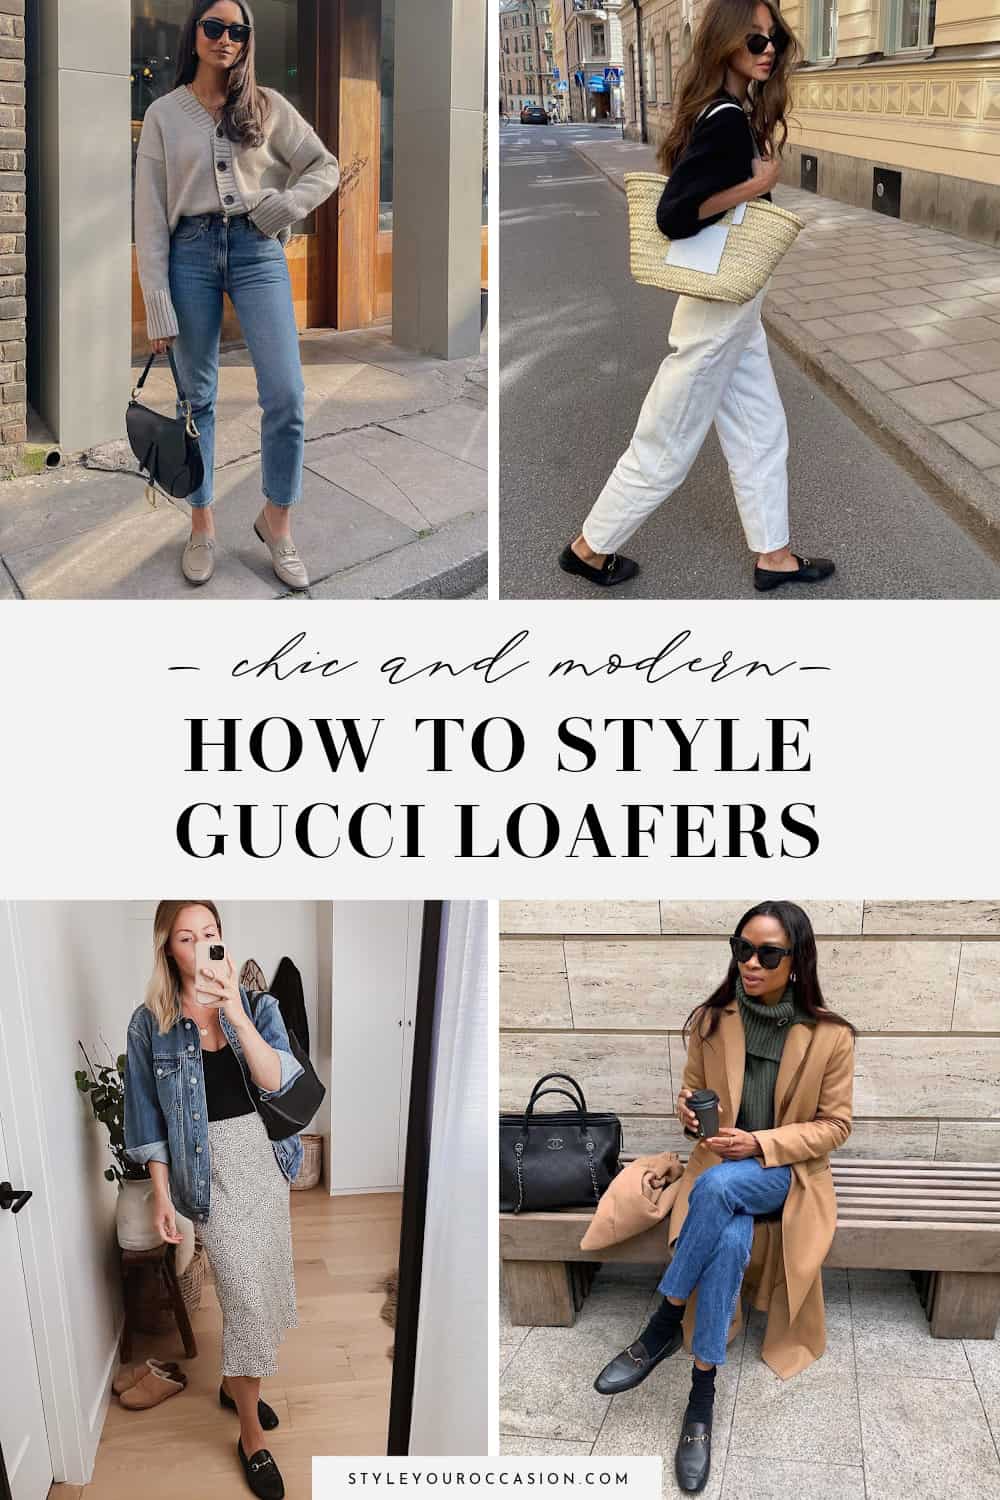 18+ Modern Womens Gucci Loafers Outfit Ideas (casual or dressy!)